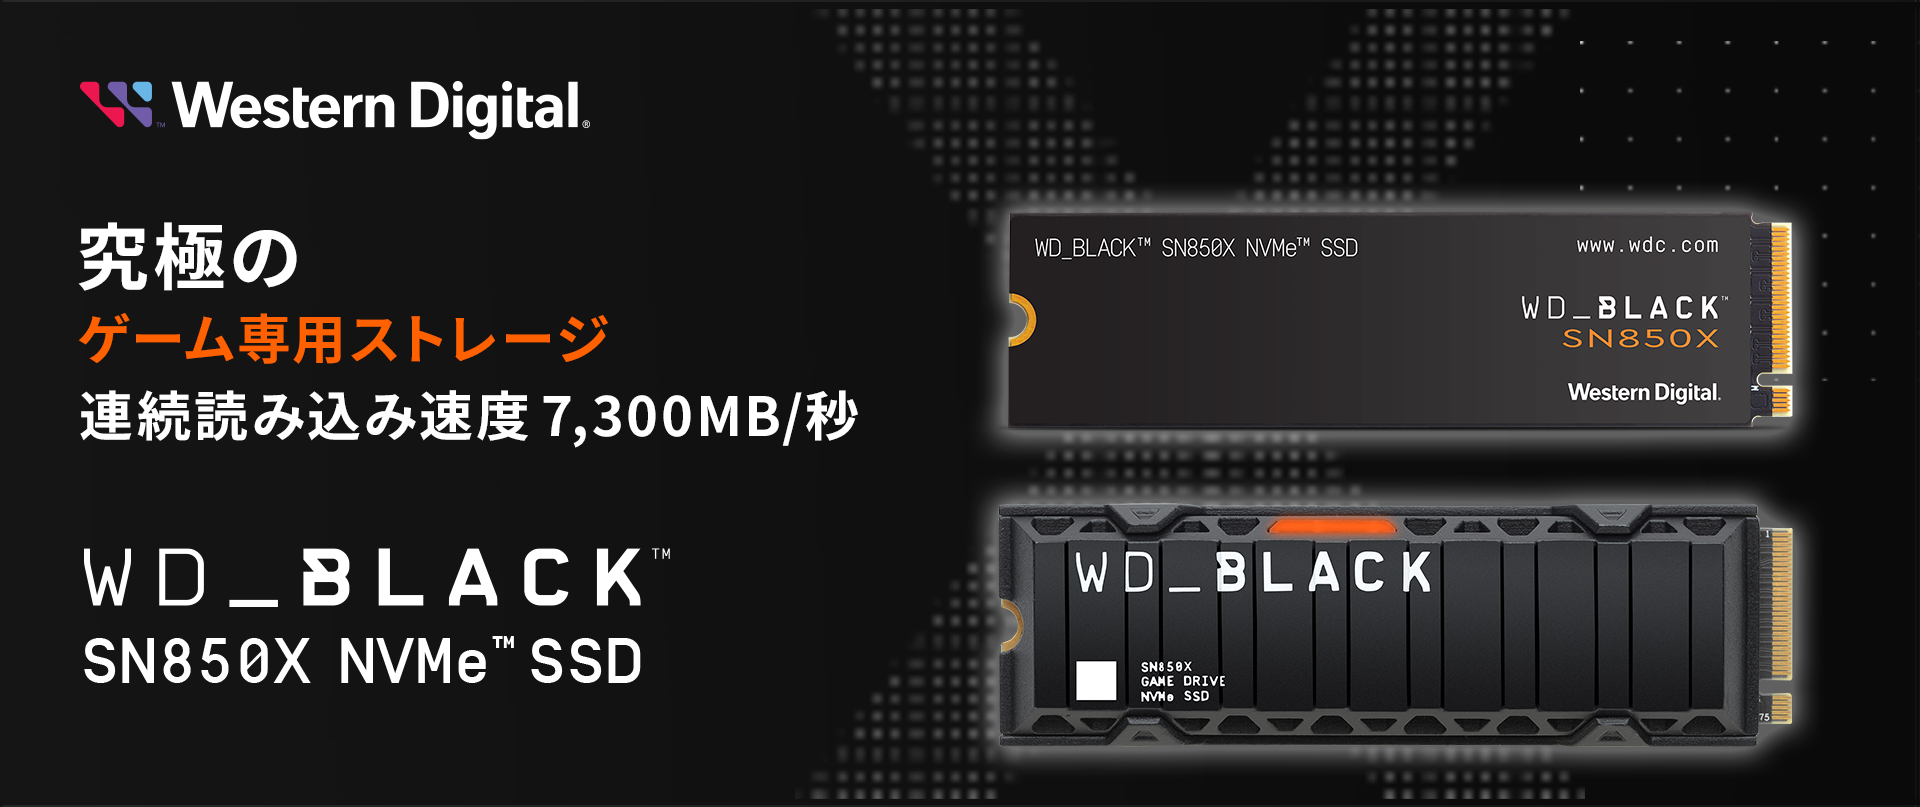 WD_BLACK SN850X NVMe SSD｜PC専門店【ツクモ】公式通販サイト